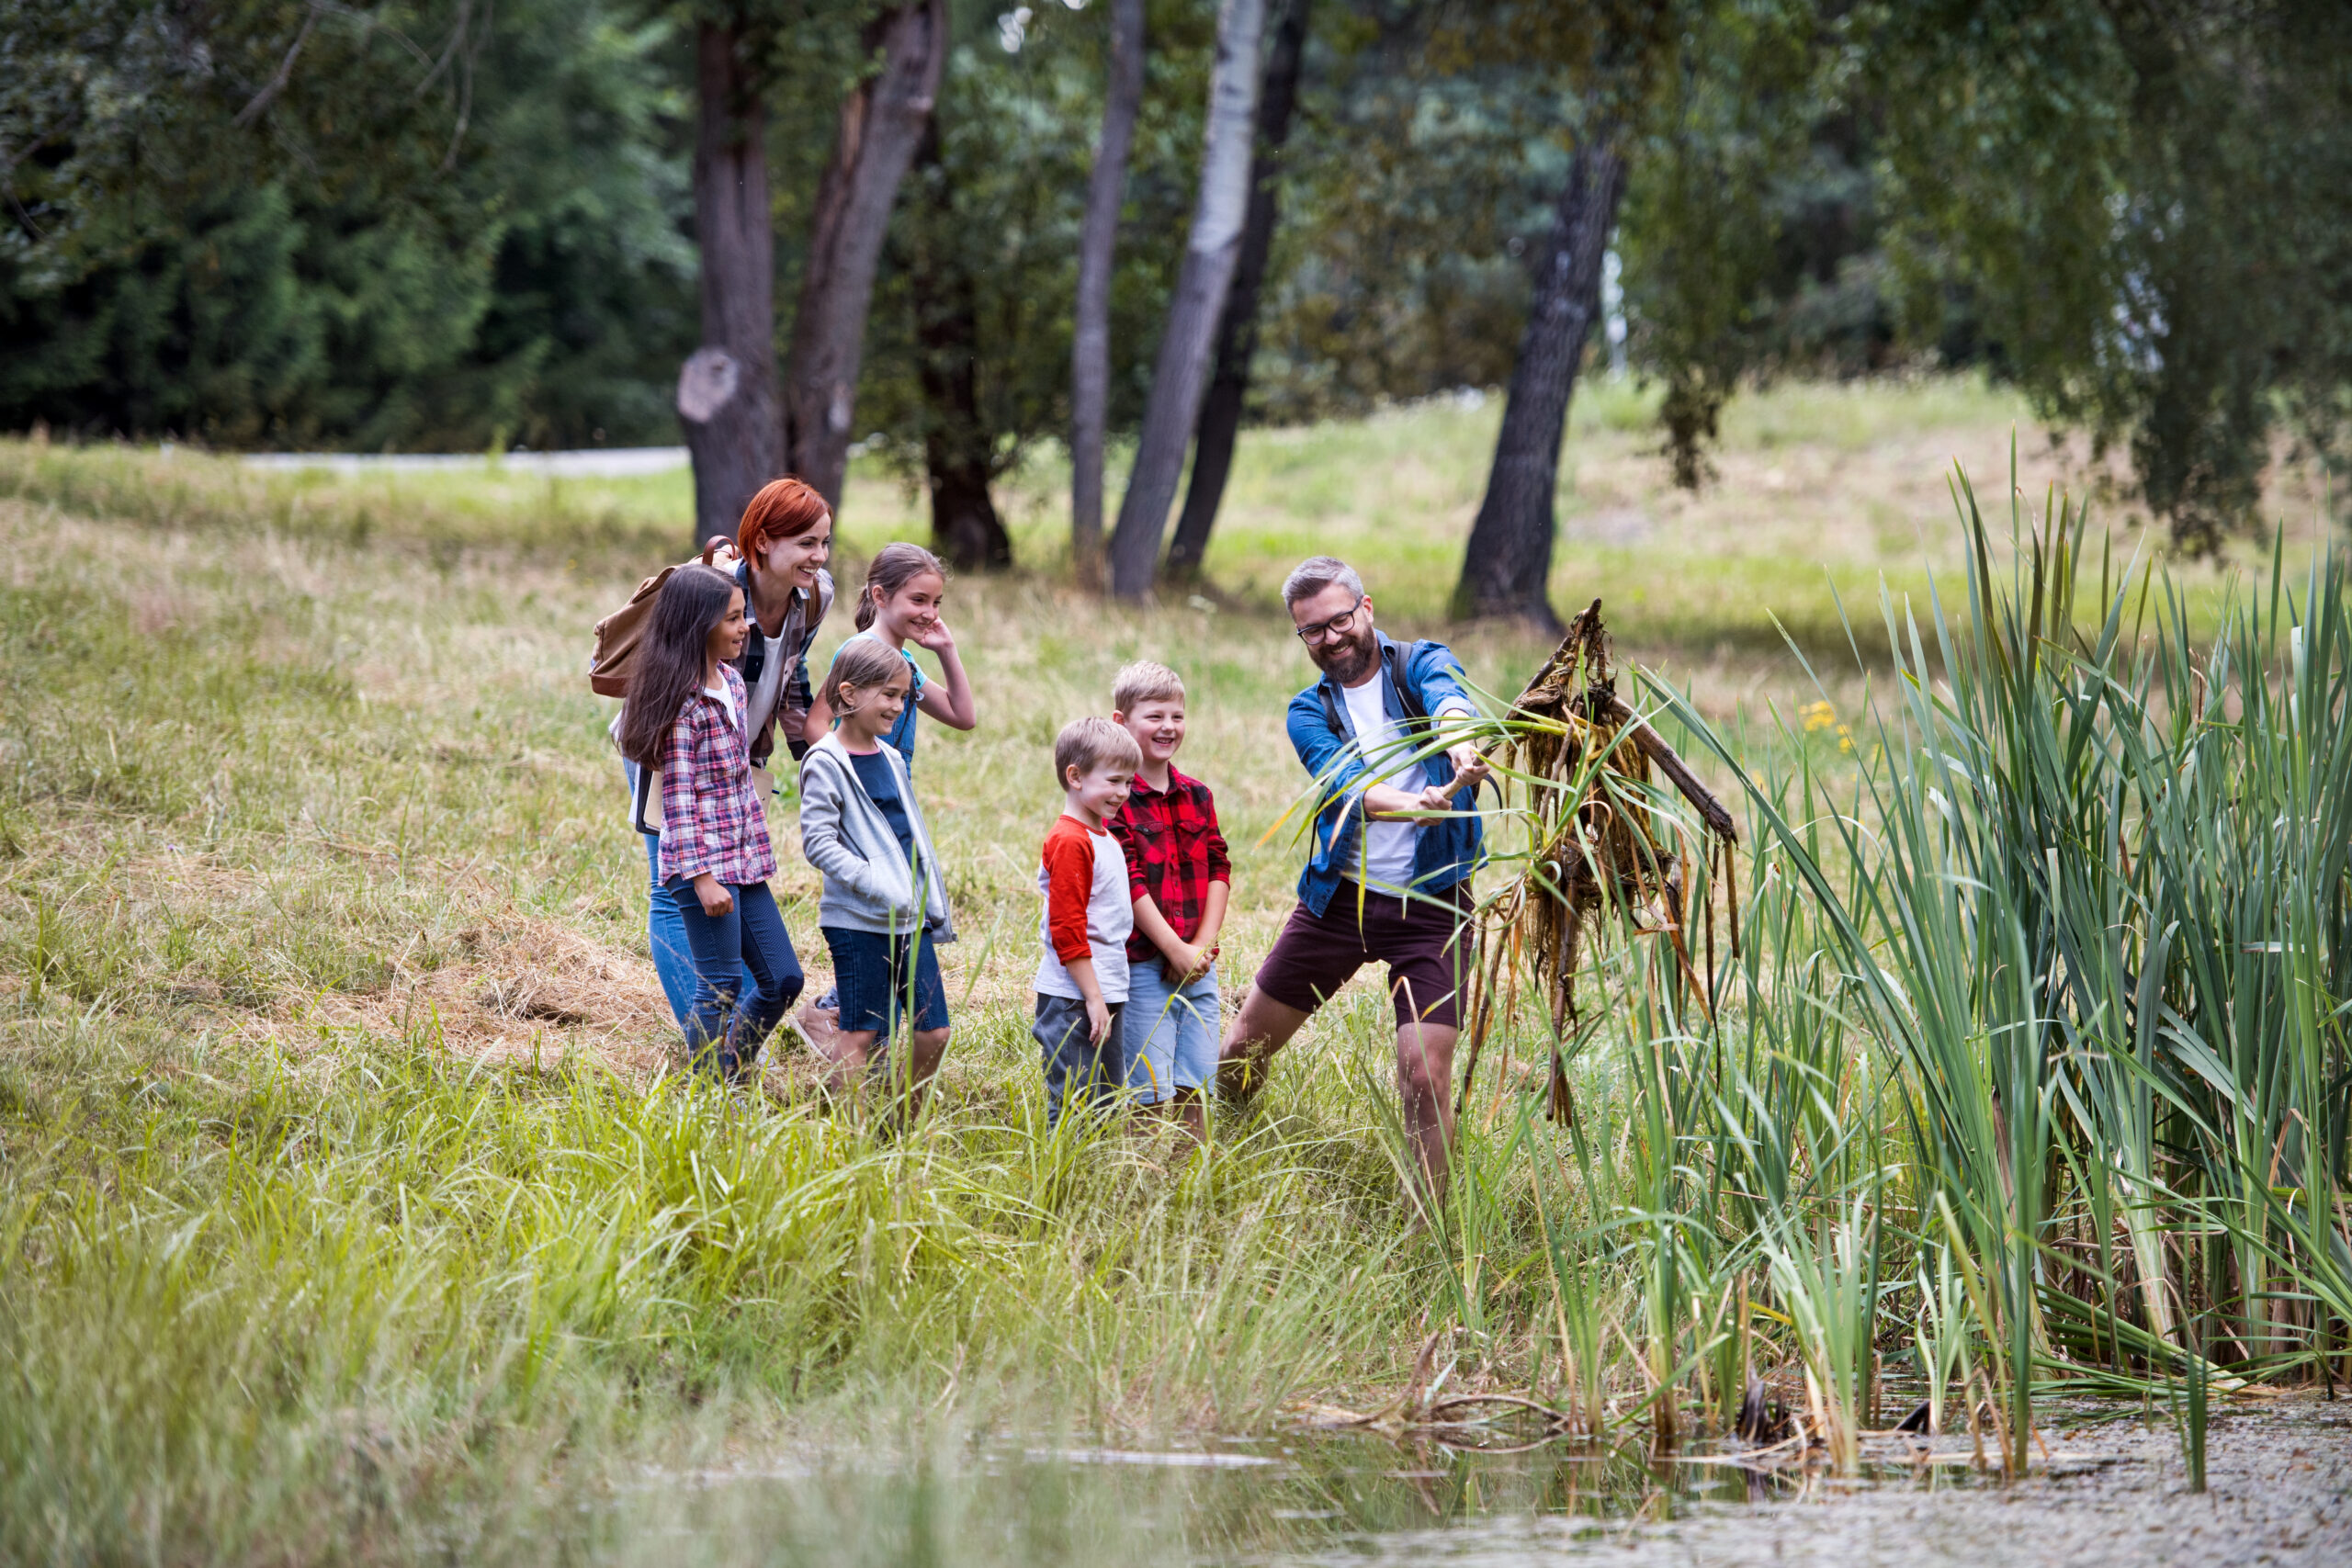 A group of small school children with teacher on field trip in nature.